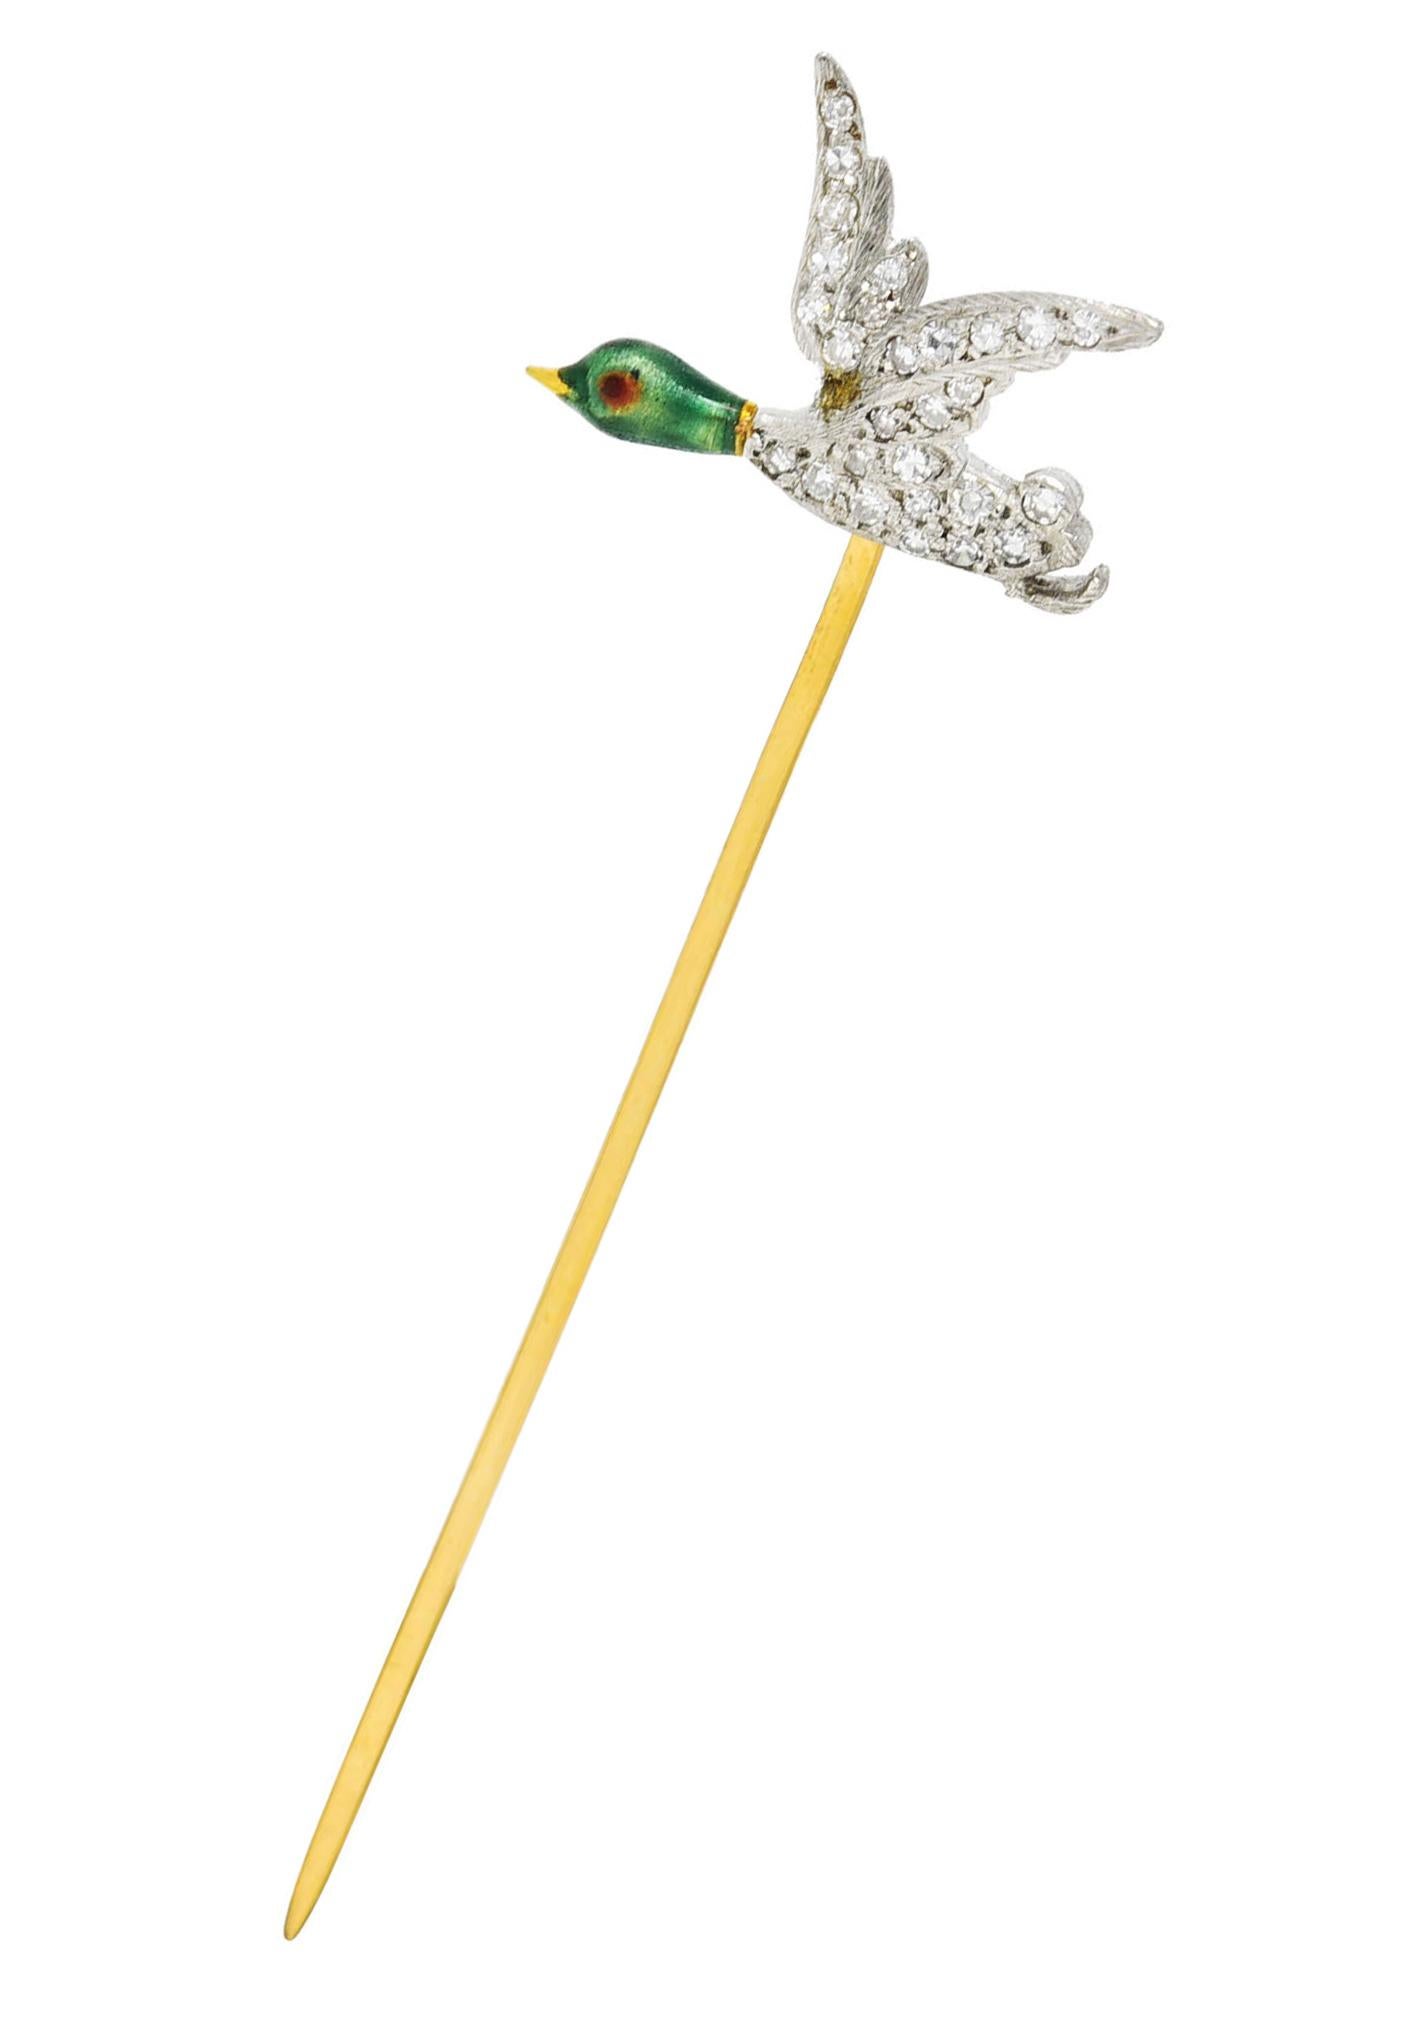 Stickpin is designed as a flying mallard duck with yellow gold beak and enamel painted head. Transparent bright green with a transparent red eye - exhibiting minimal loss. With a platinum winged body - pavè set with single cut diamonds throughout.